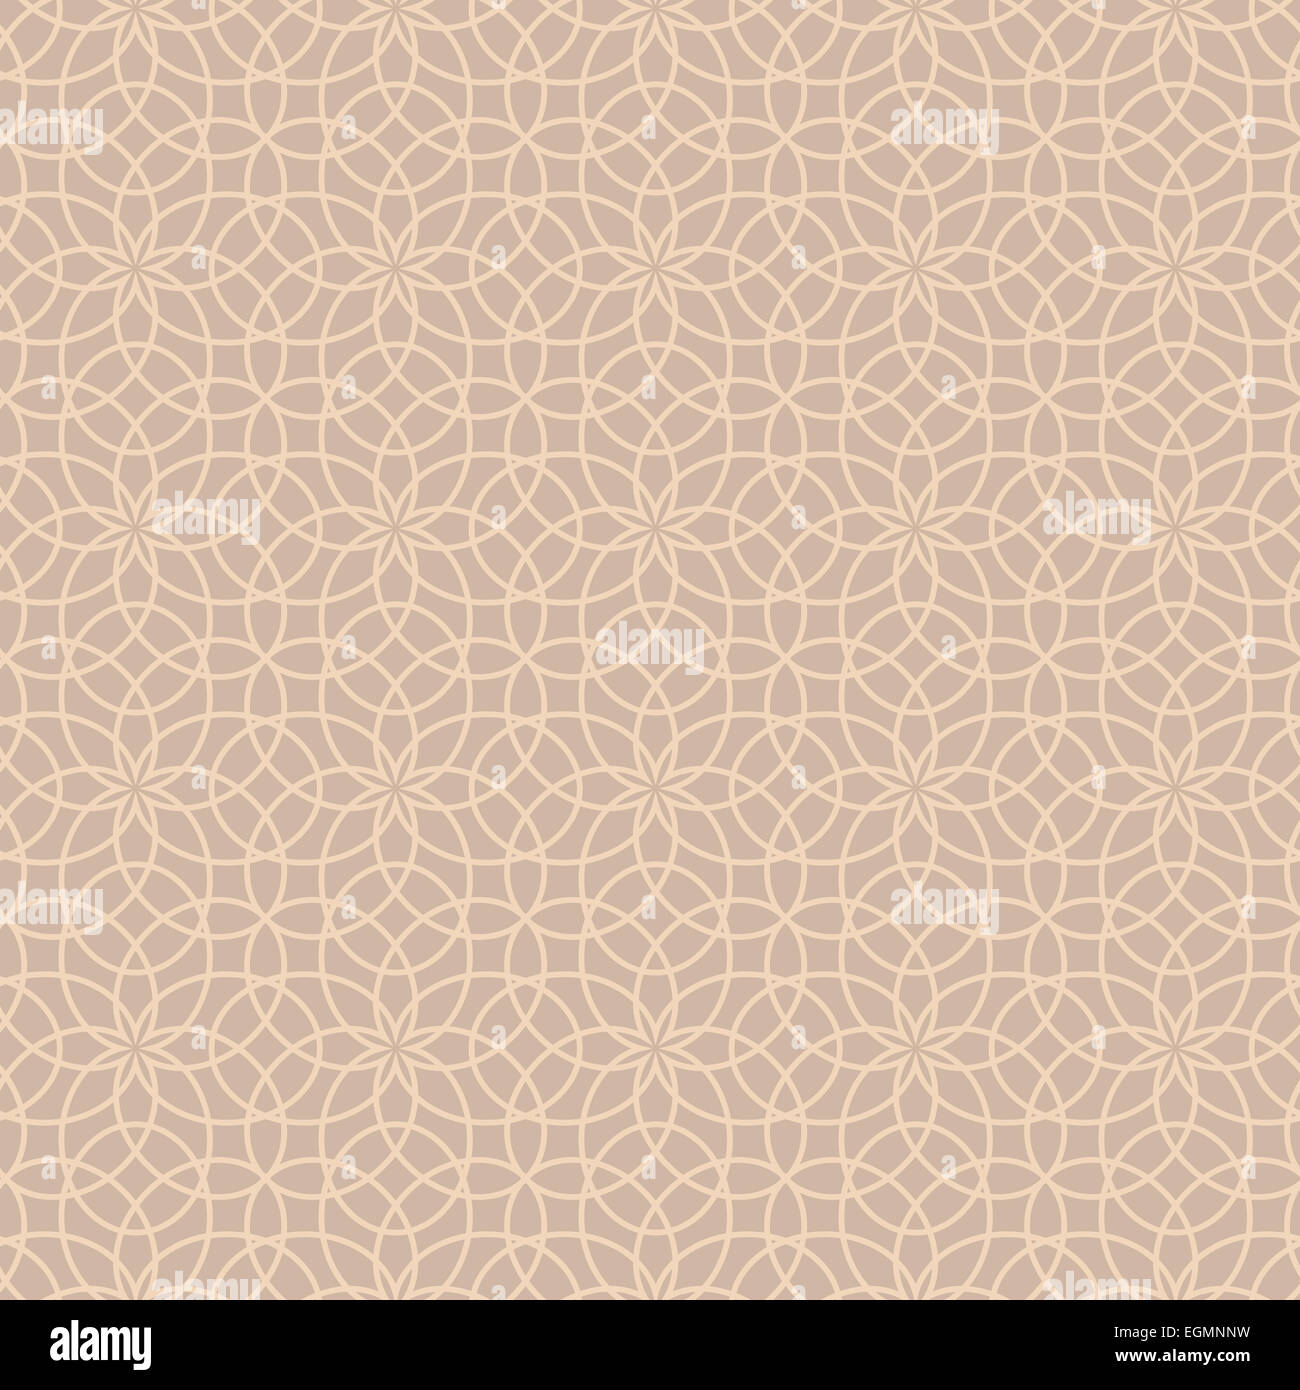 Abstract Floral Forged Beige Seamless Pattern from Line Flowers on Light Brown Background for Wallpaper, Furniture or Interior Design Stock Photo